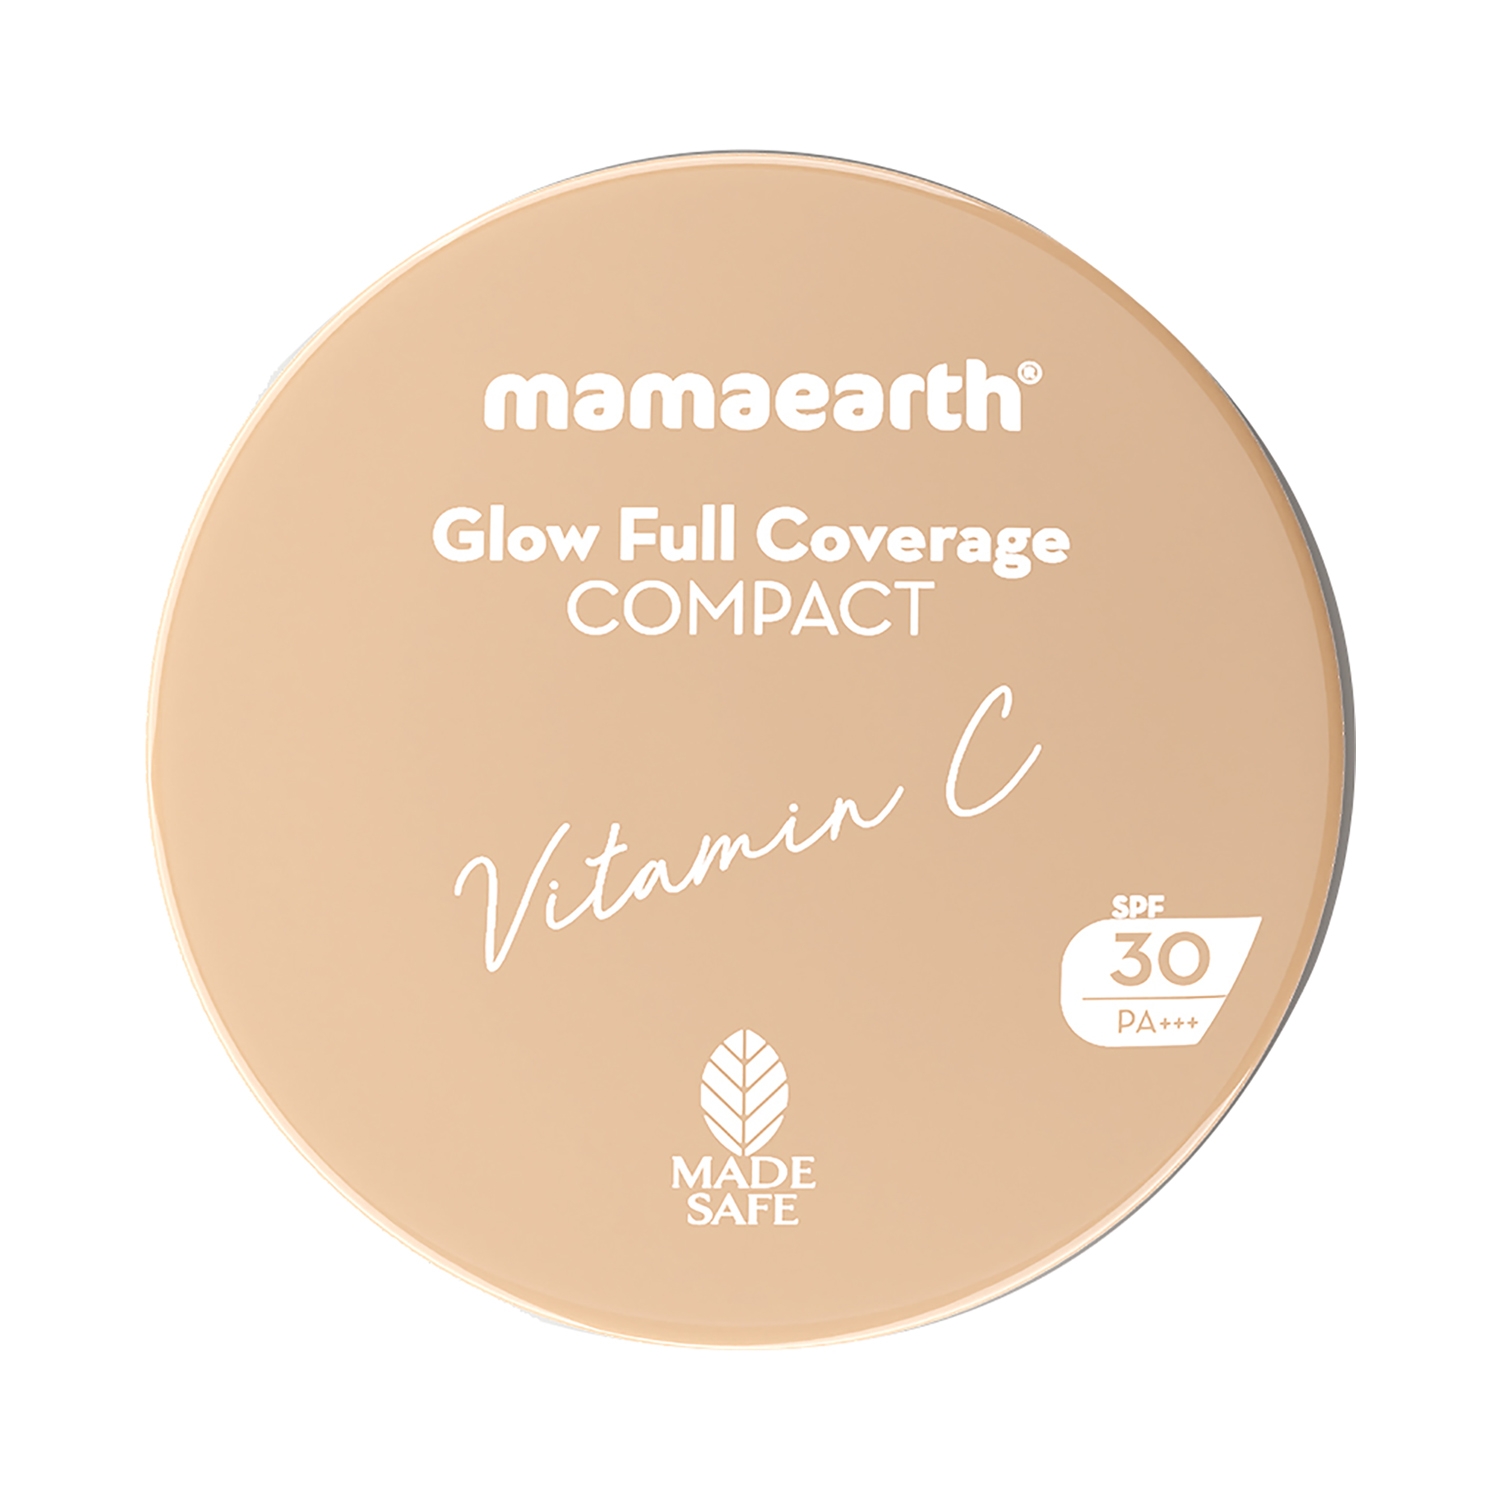 Mamaearth | Mamaearth Glow Full Coverage Compact SPF 30 PA+++ With Vitamin C - 05 Almond Glow (9g)